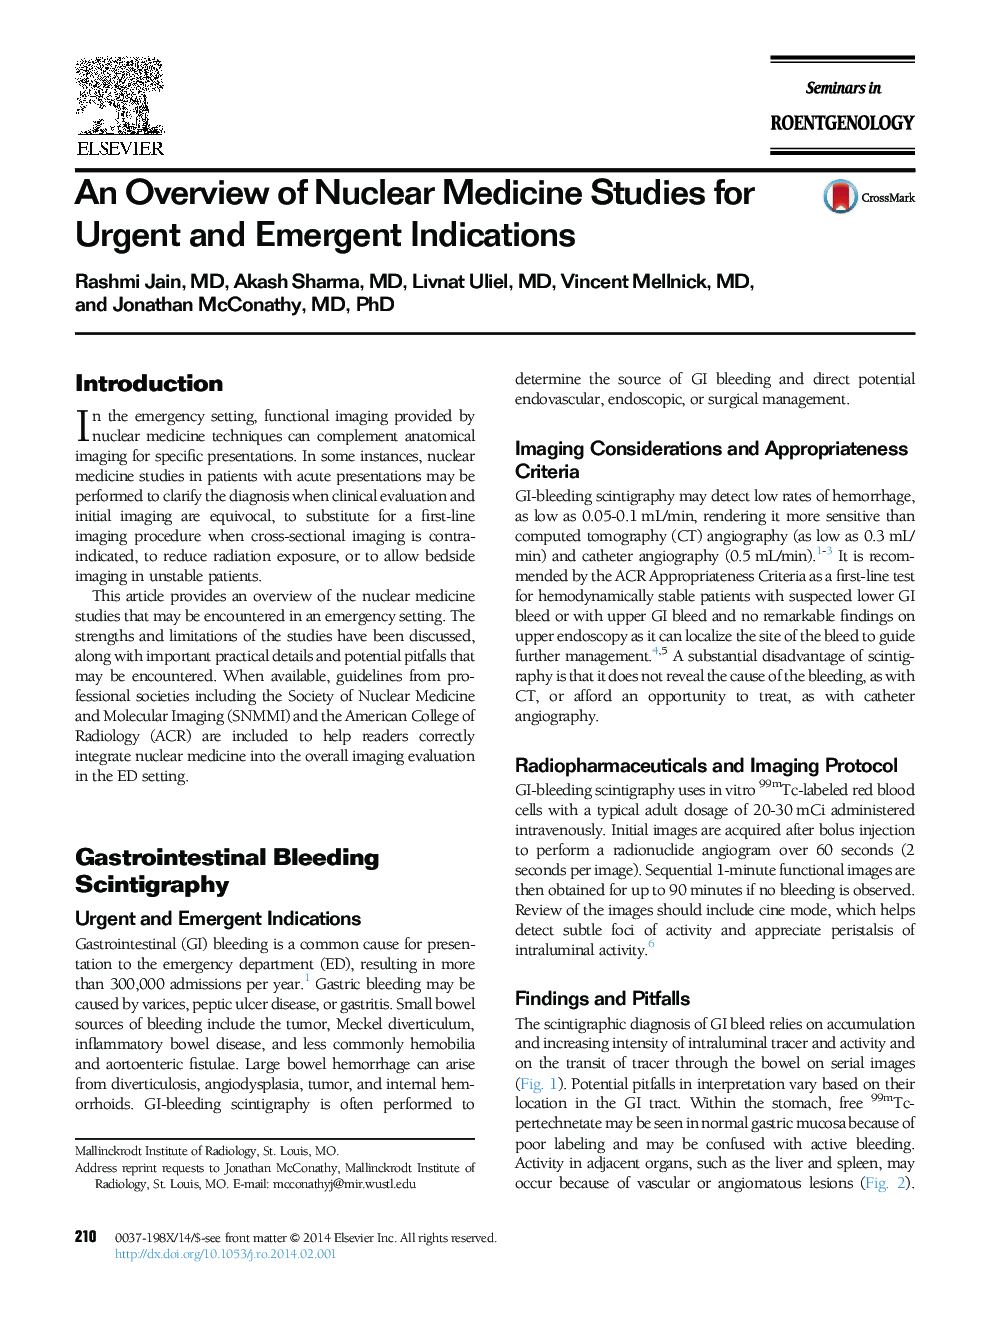 An Overview of Nuclear Medicine Studies for Urgent and Emergent Indications